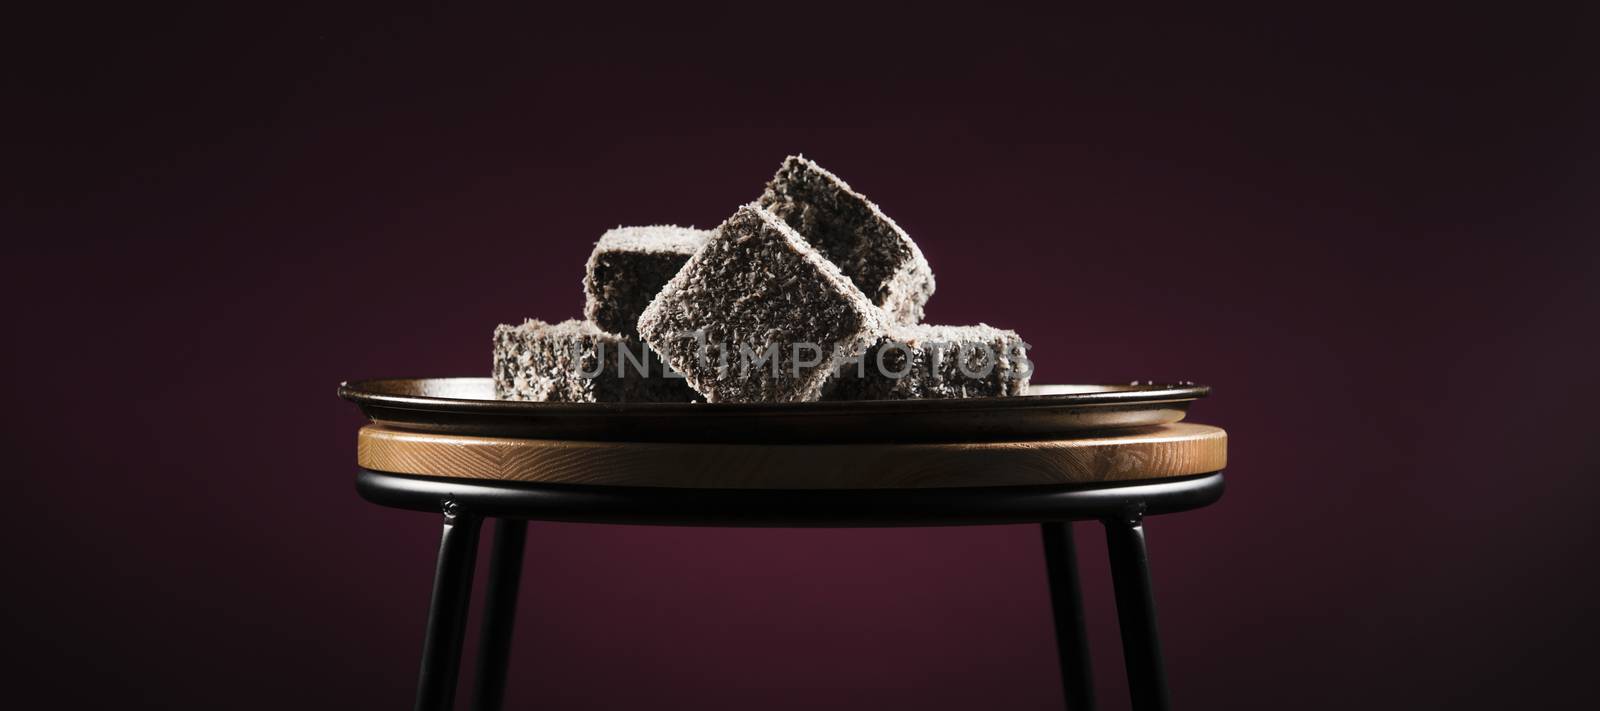 Group of Lamingtons on a metal baking tray.